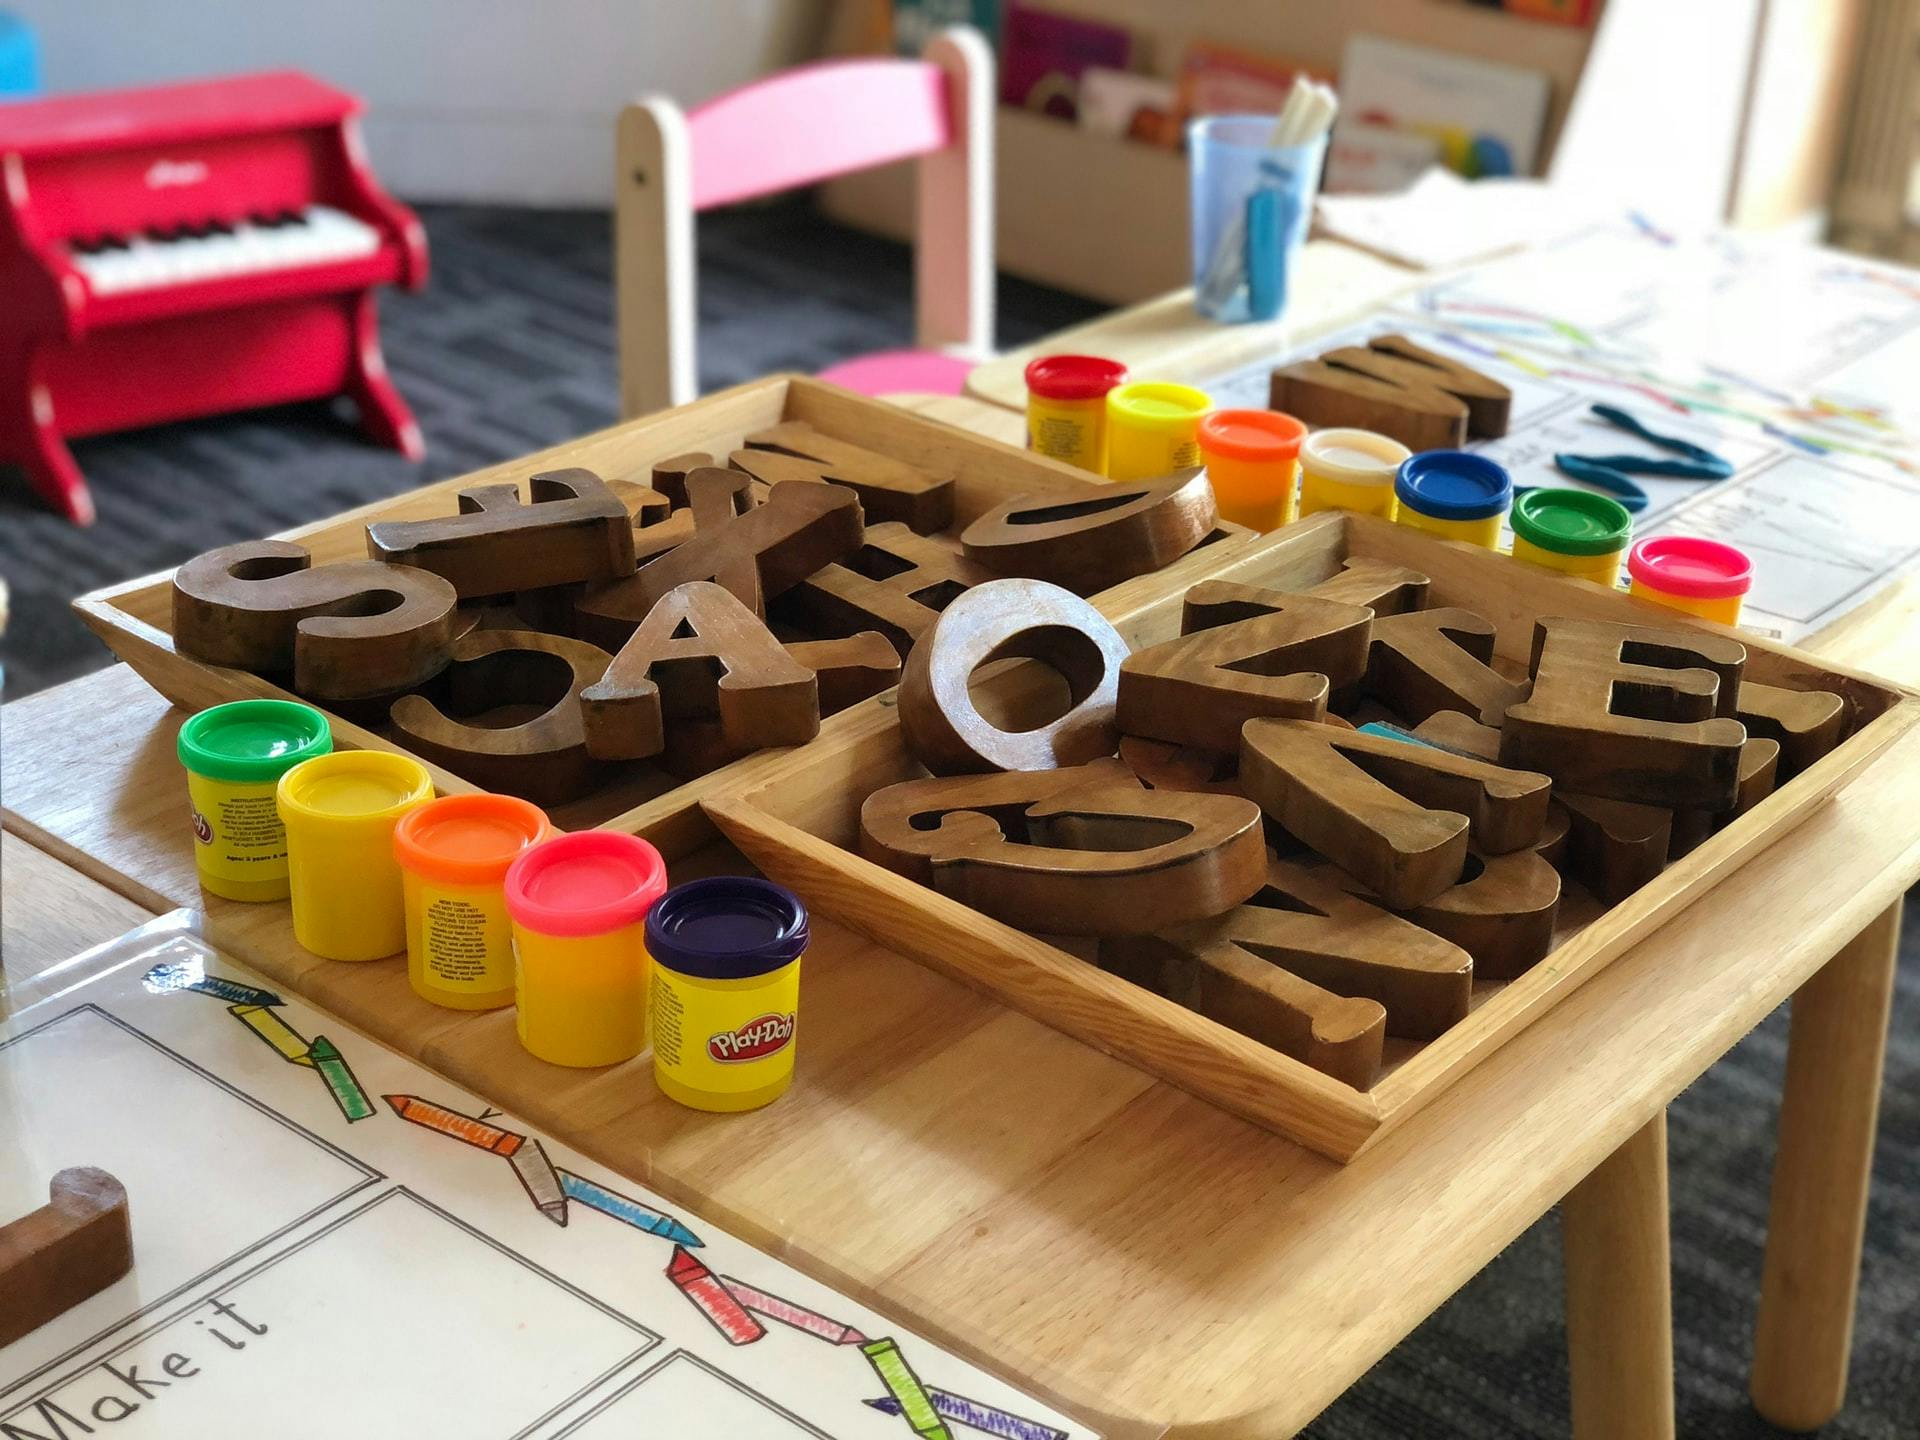 Wooden blocks and play-dough set out as part of a preschool lesson plan